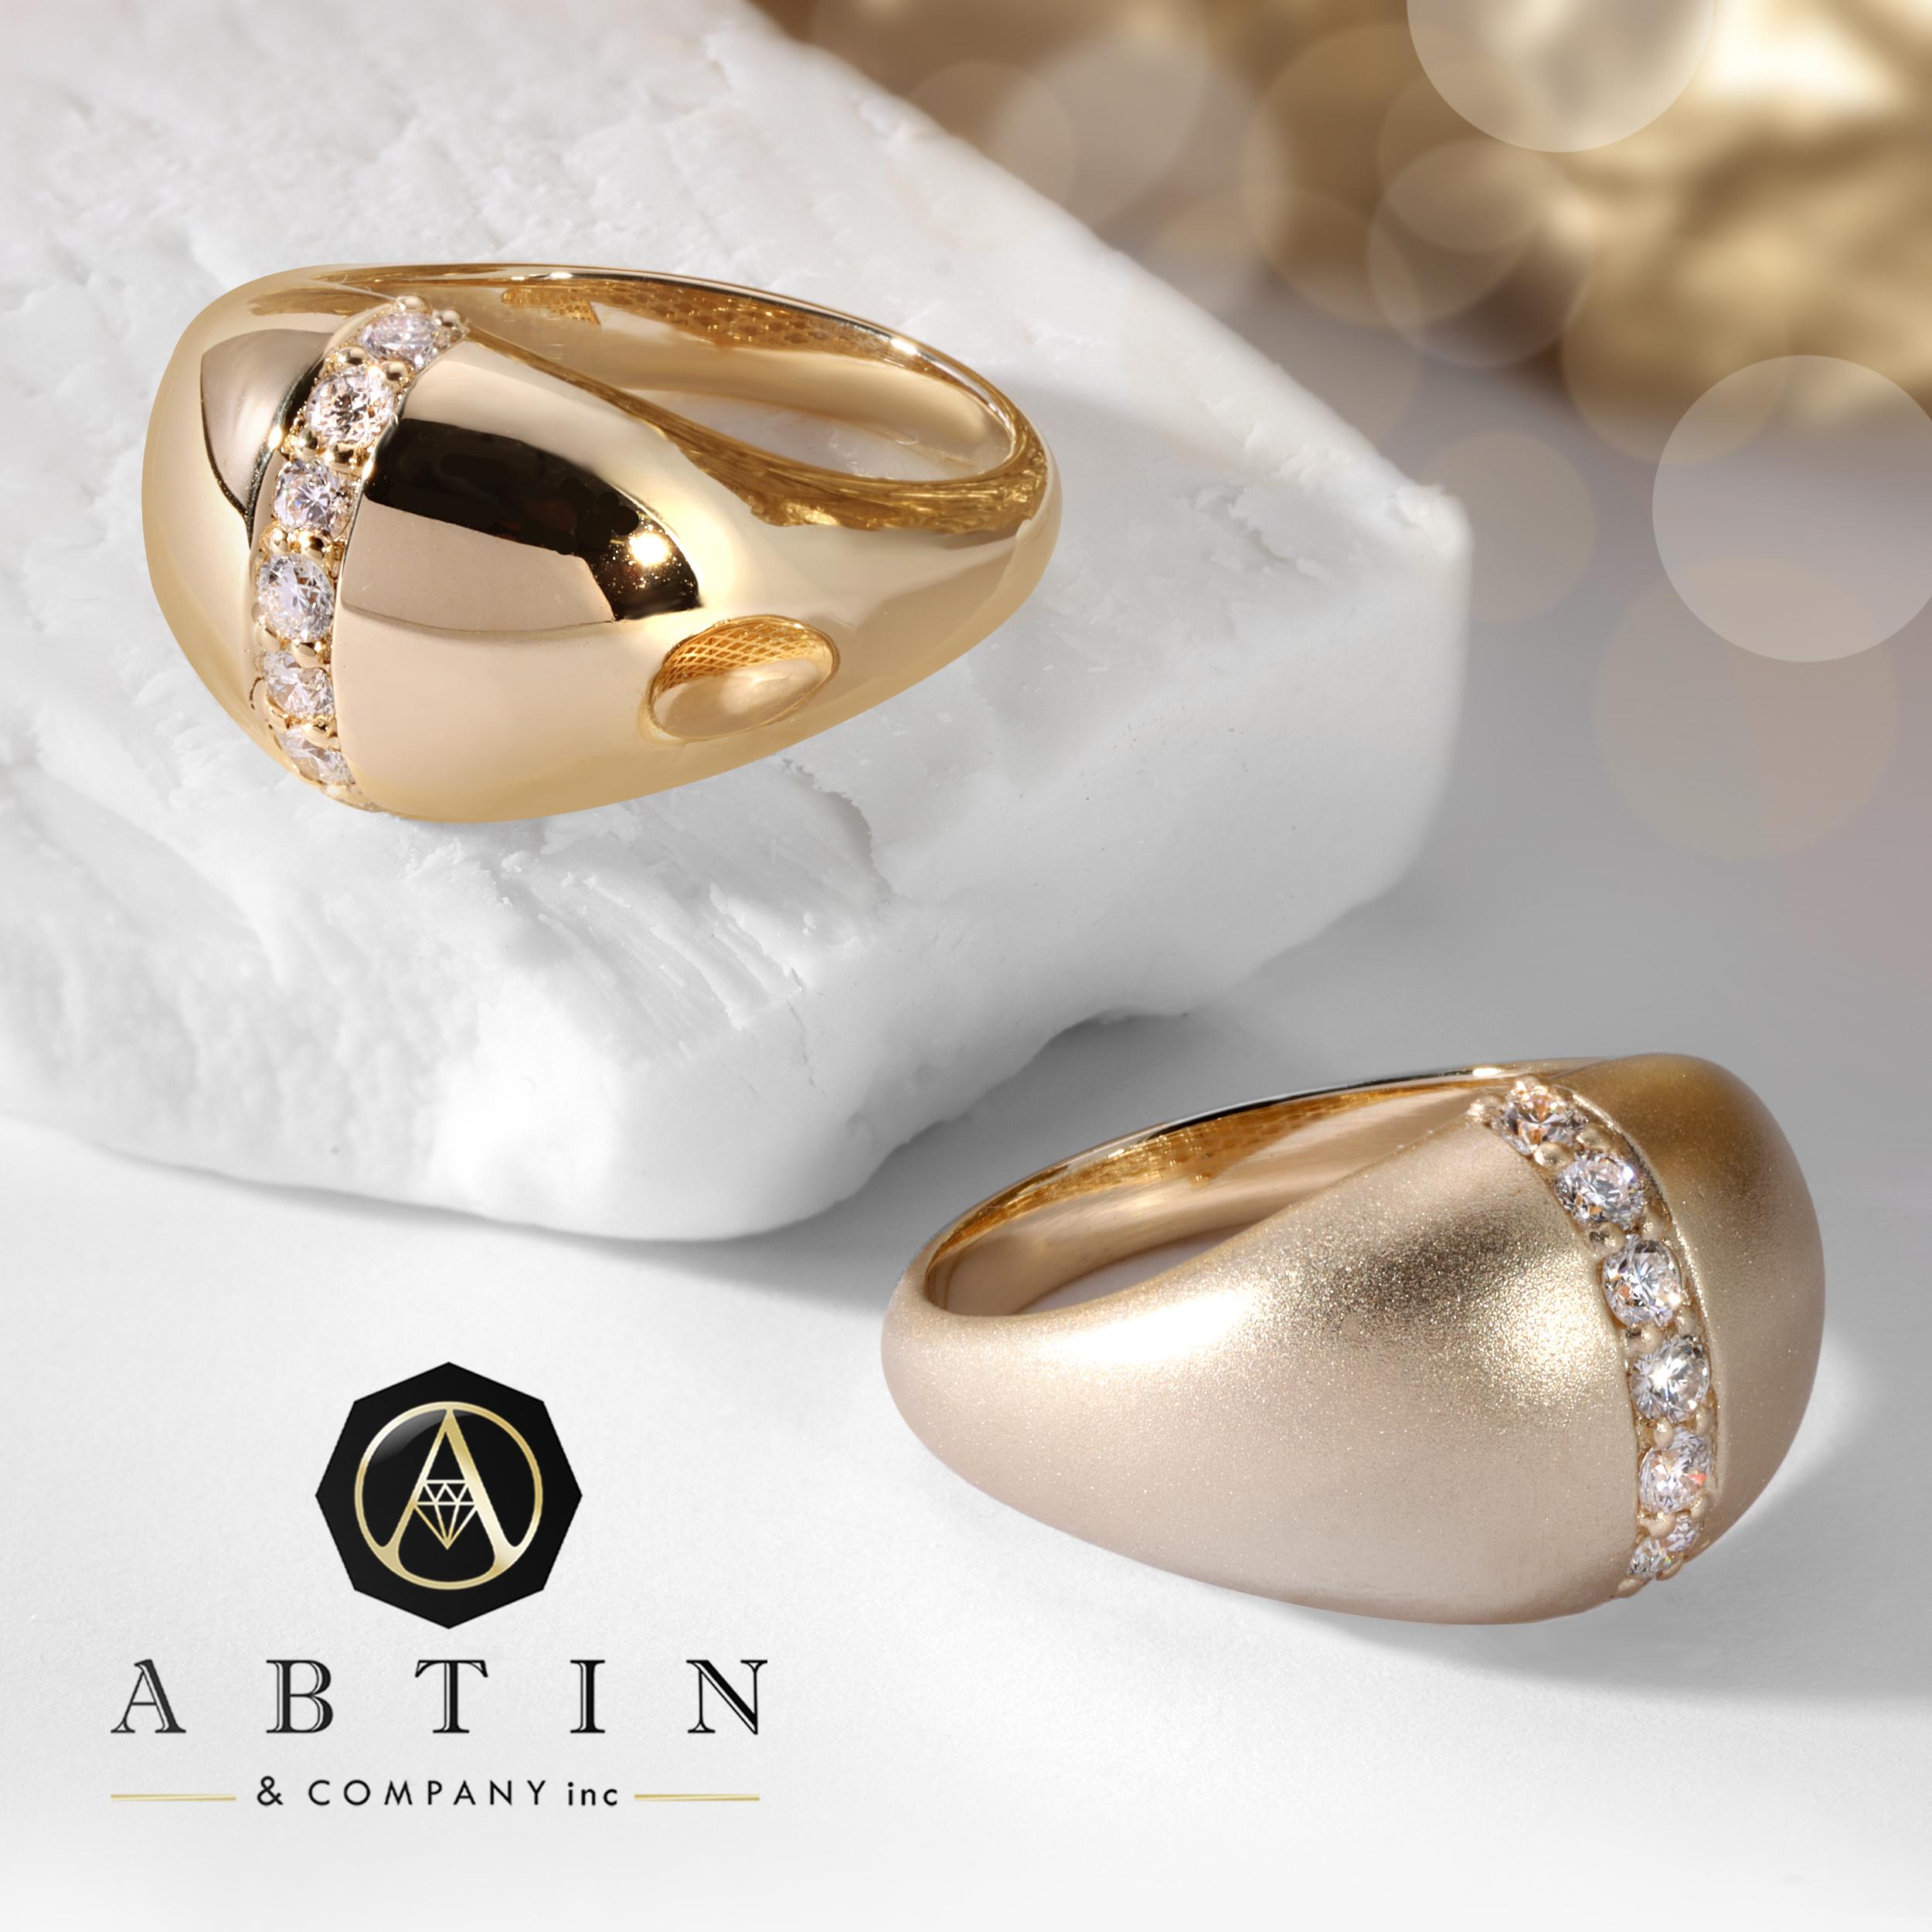 This elegant 14k Gold Diamond Dome Ring offers a refined twist on our signature design. It showcases ethically sourced, genuine glistening round diamonds meticulously hand-set at the center.

Gold Weight: 7.50 gr
Diamond Weight: 0.31 ct
Available in